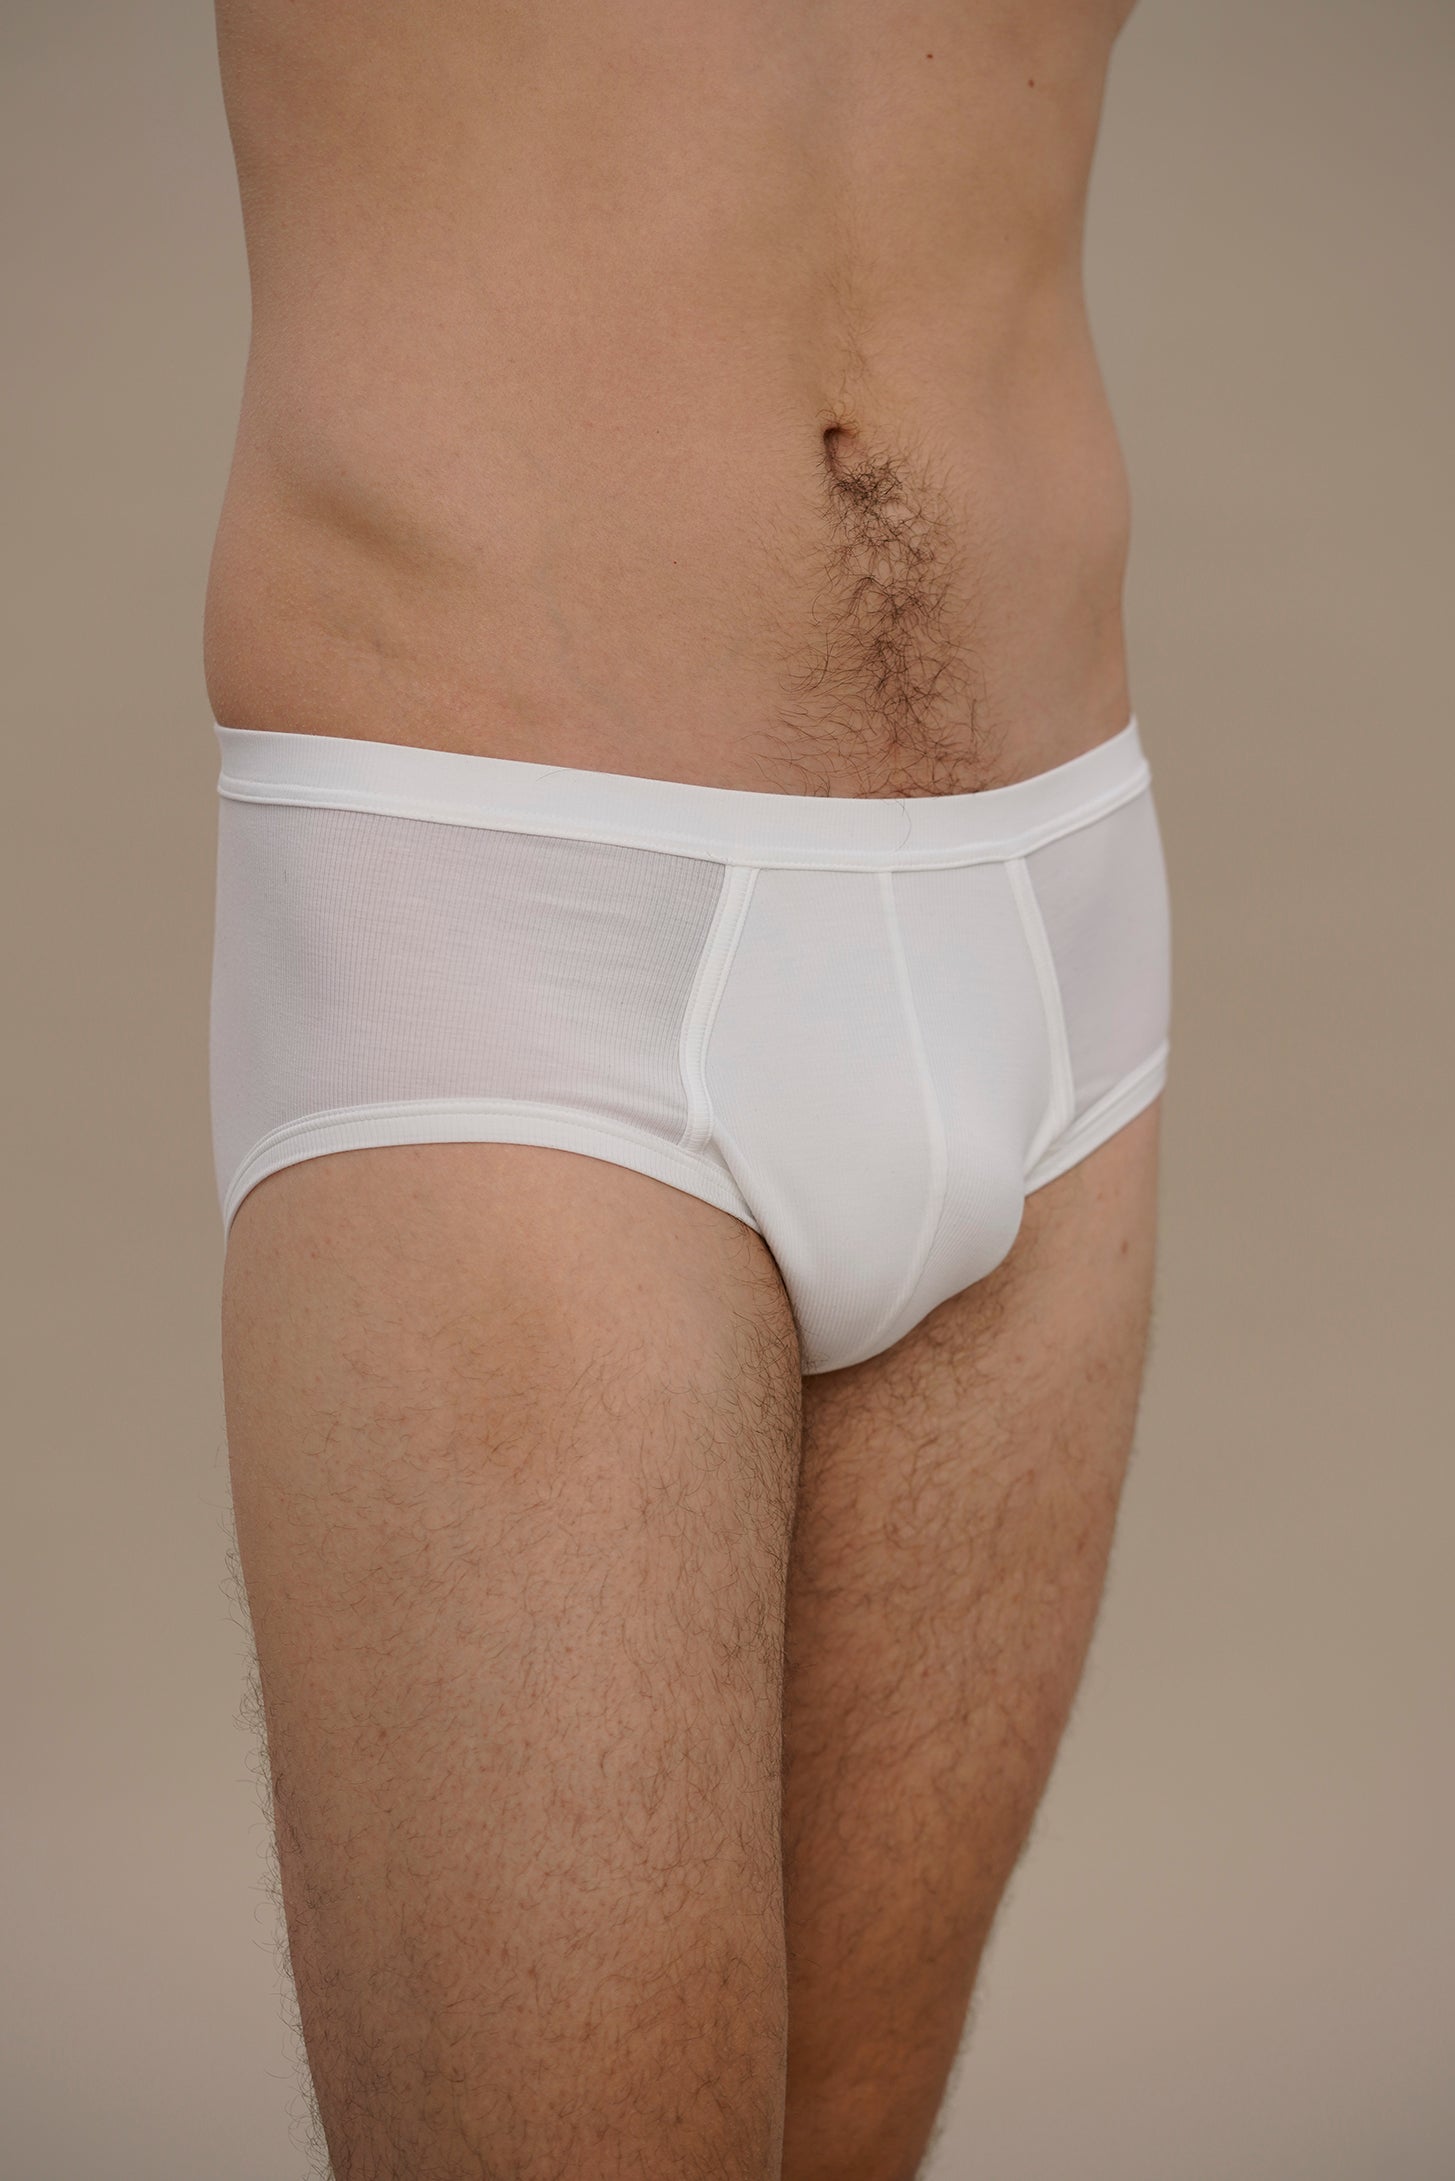 Underpants / briefs in white made of natural MicroModal from moi-basics